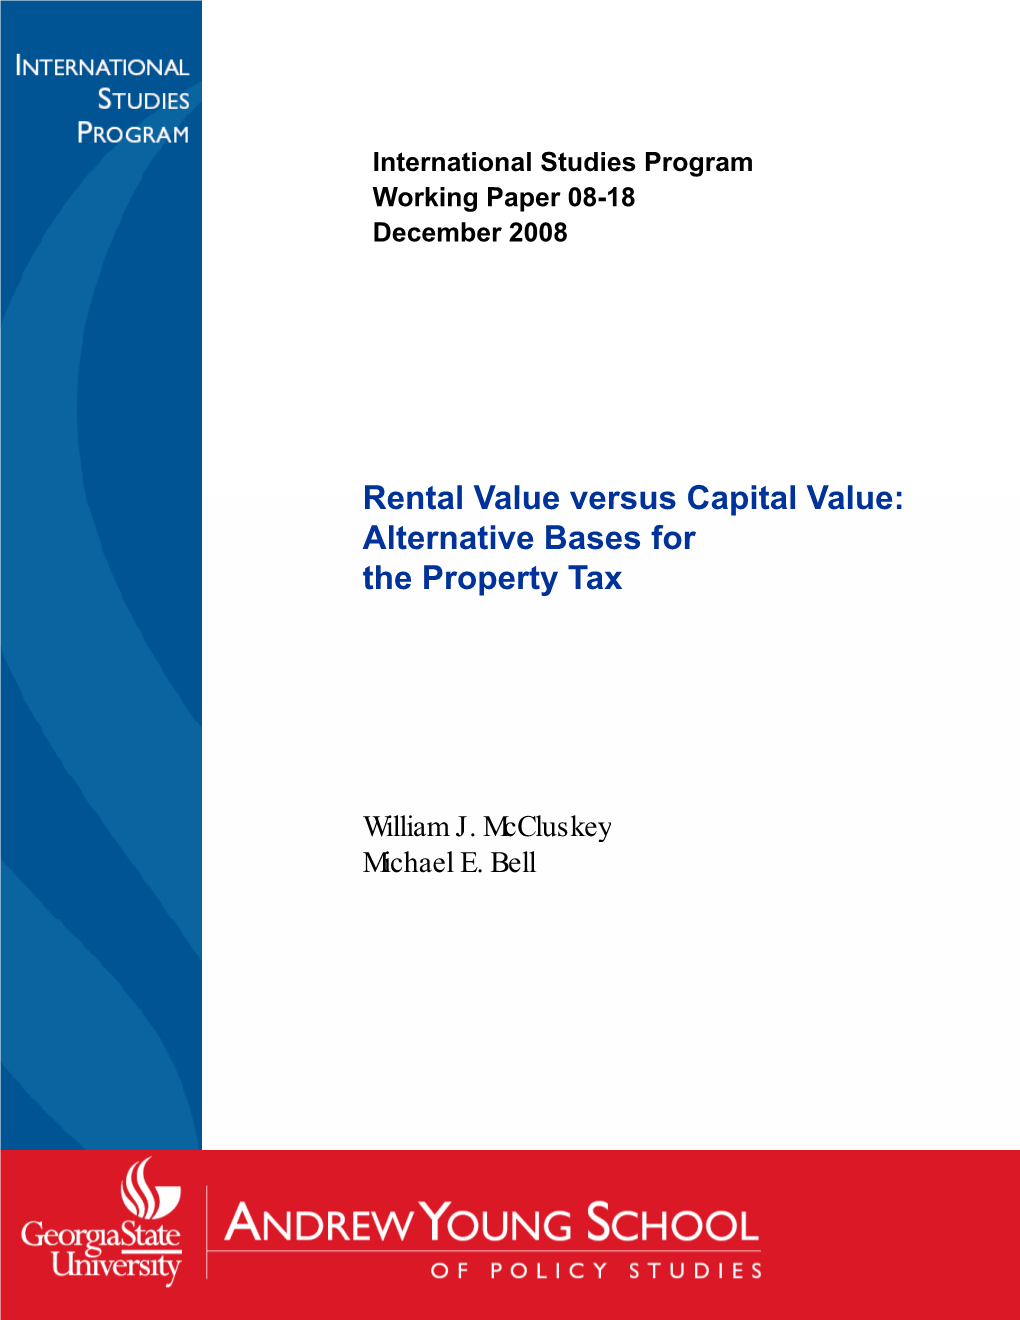 Rental Value Versus Capital Value: Alternative Bases for the Property Tax